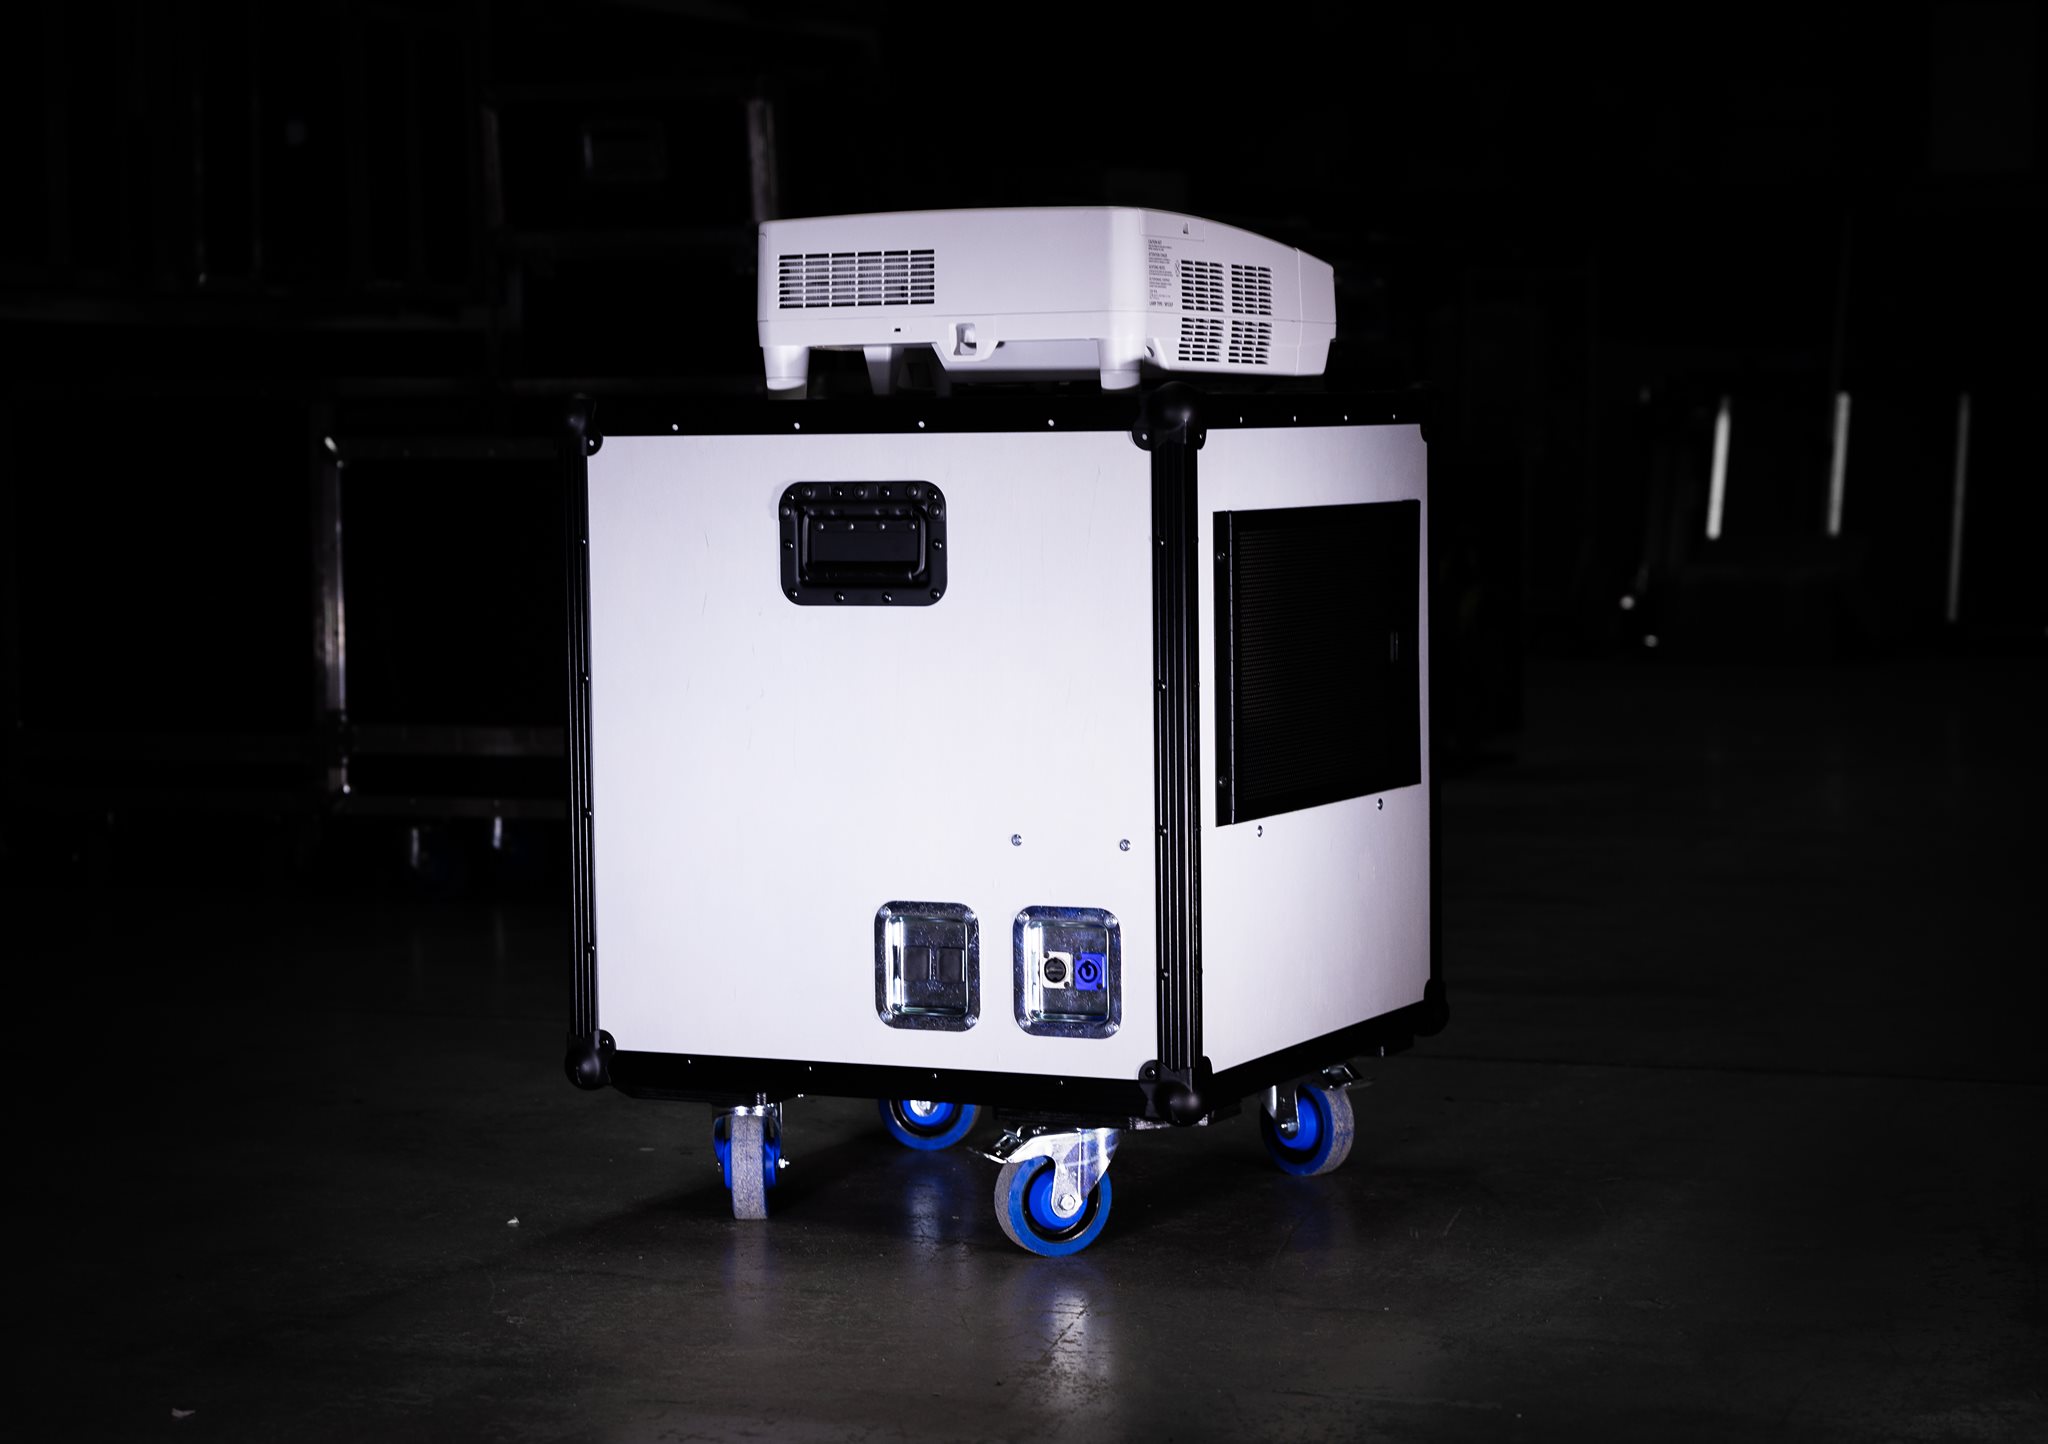 Beautiful pure white concept flight case with projector on top